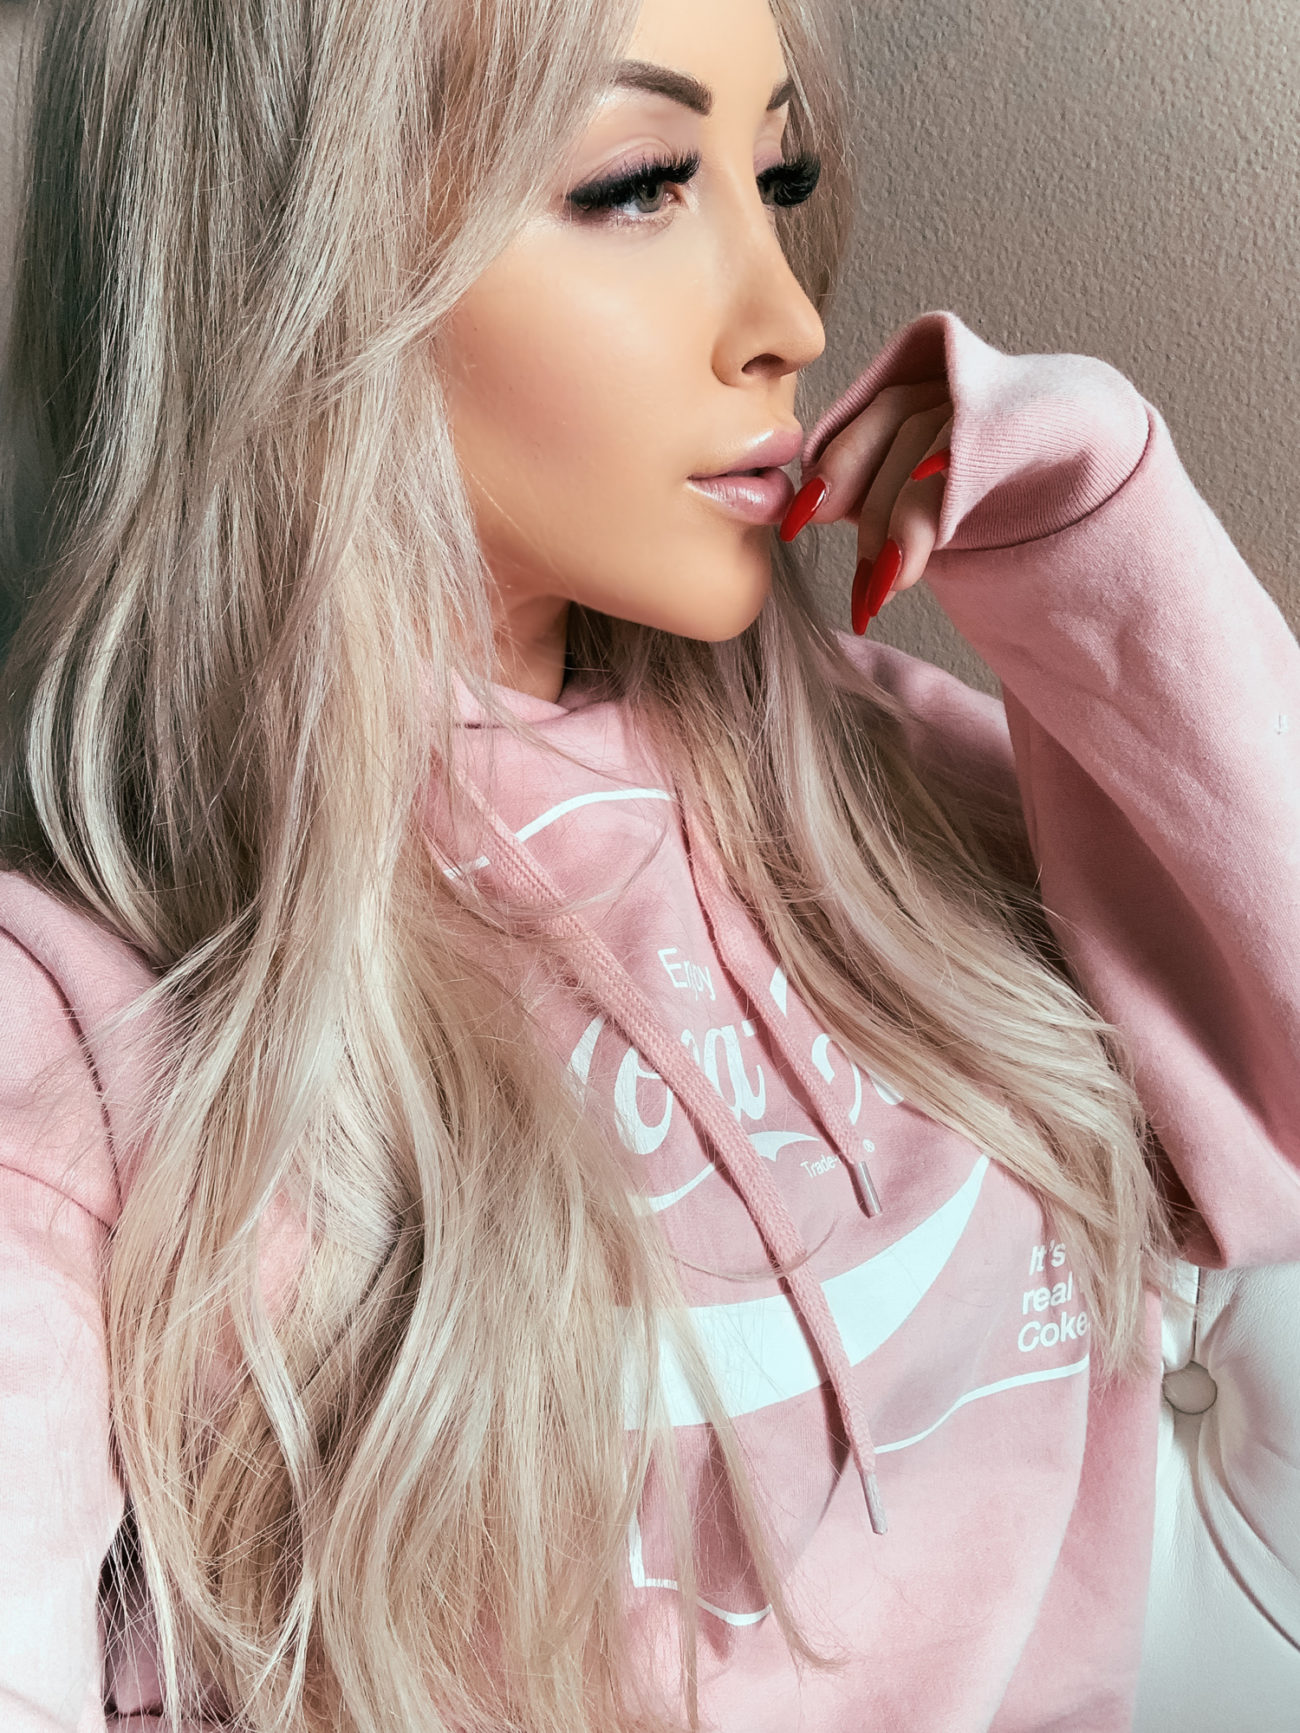 Nose Job Realness | Plastic Surgery | Side Profile | Blondie in the City by Hayley Larue